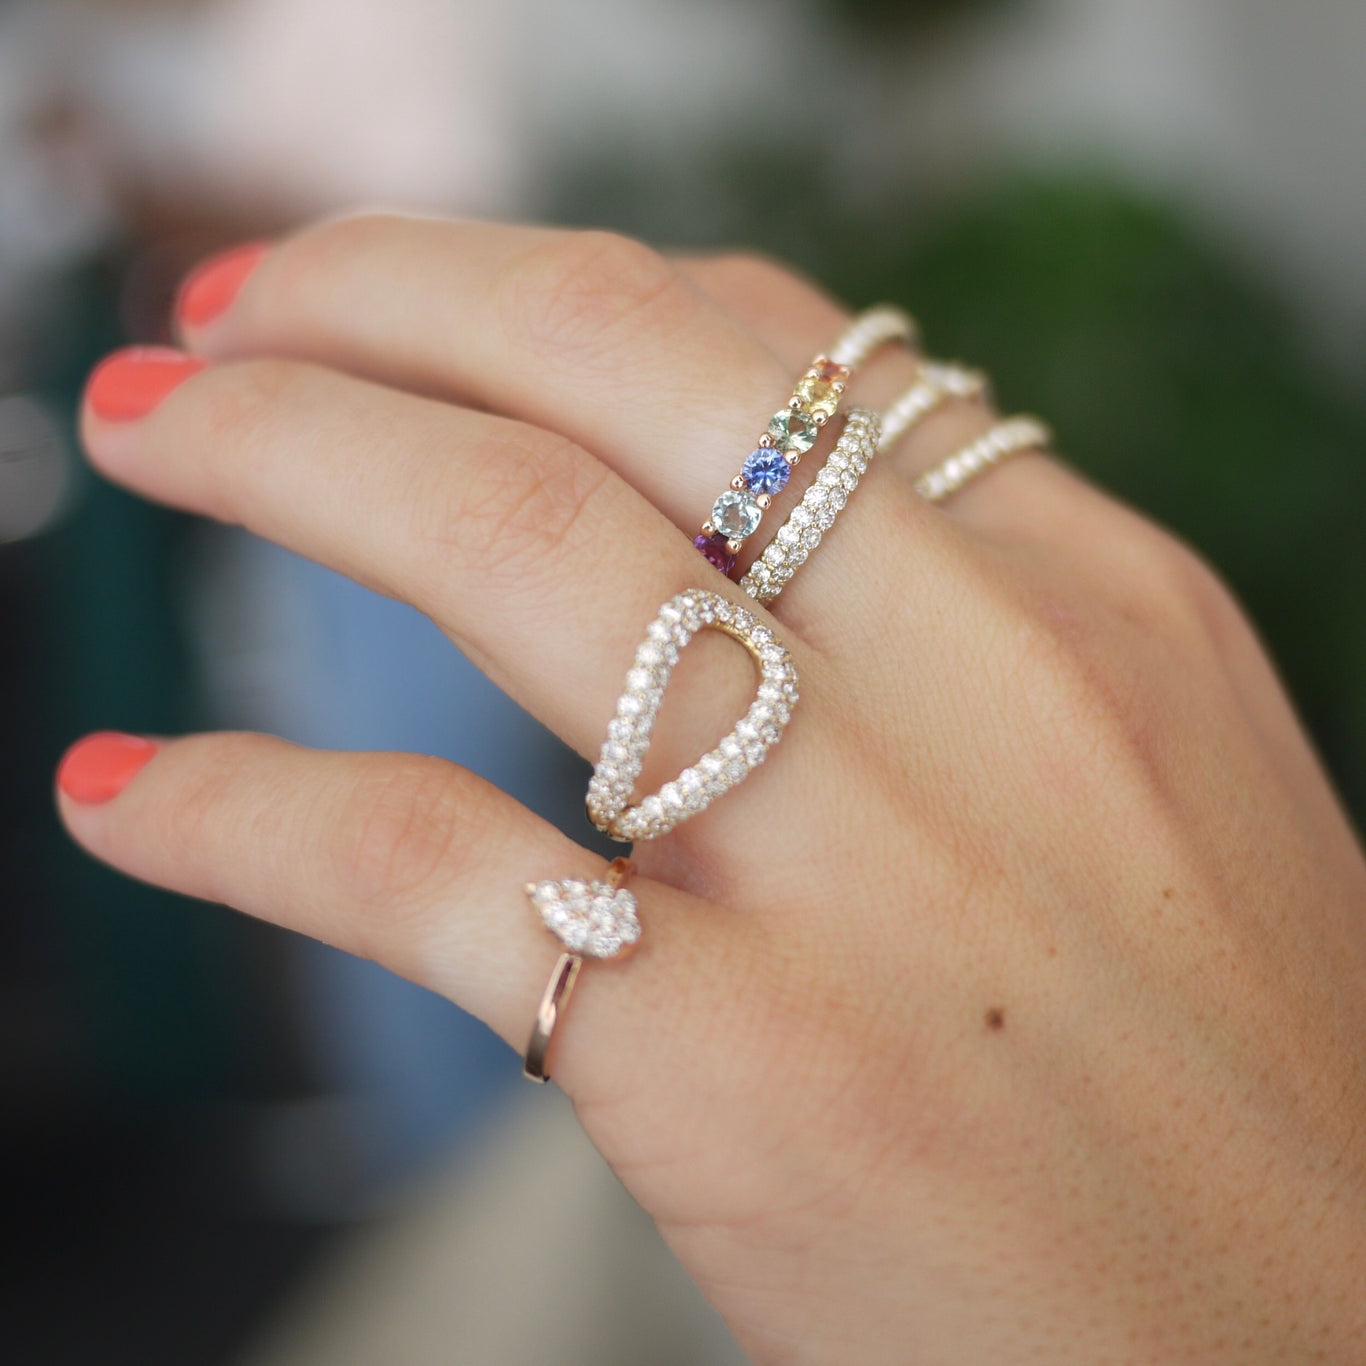 Athena Ring shown layered underneath the Rainbow Eternity Band. Also worn with the Alpha Ring and Mini Elixir Rings.